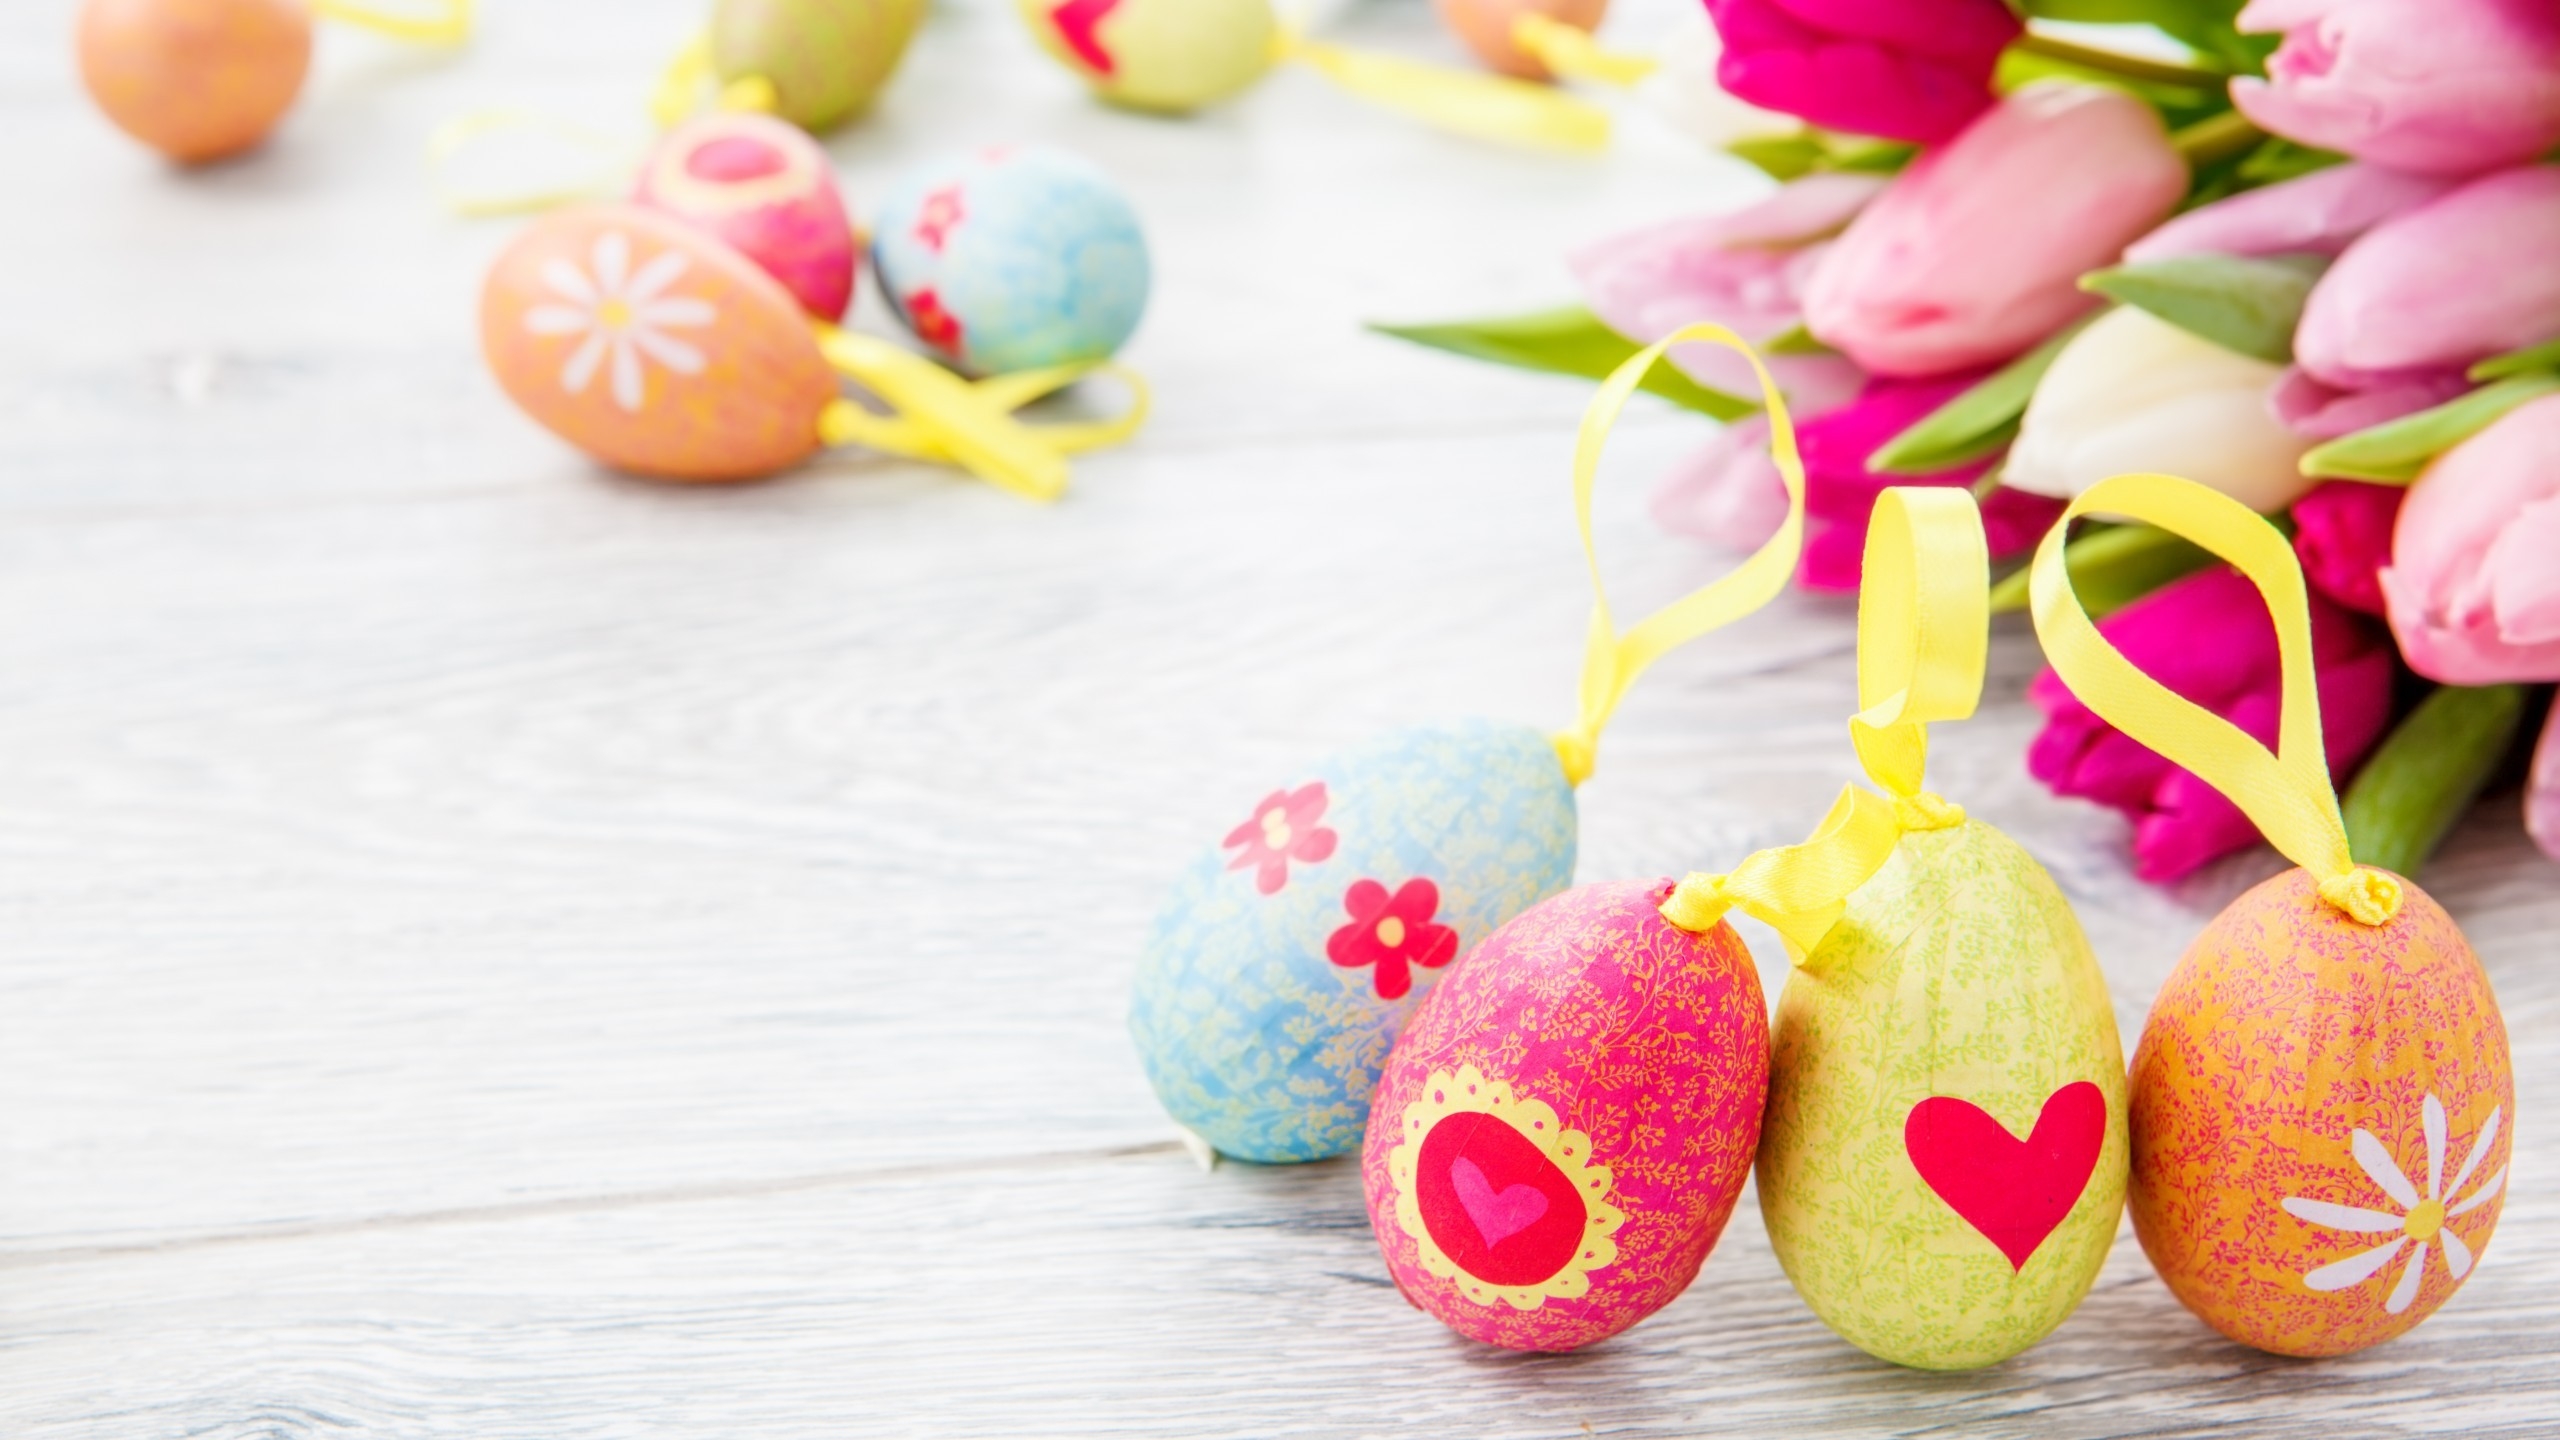 Decorative Easter Eggs for 2560x1440 HDTV resolution